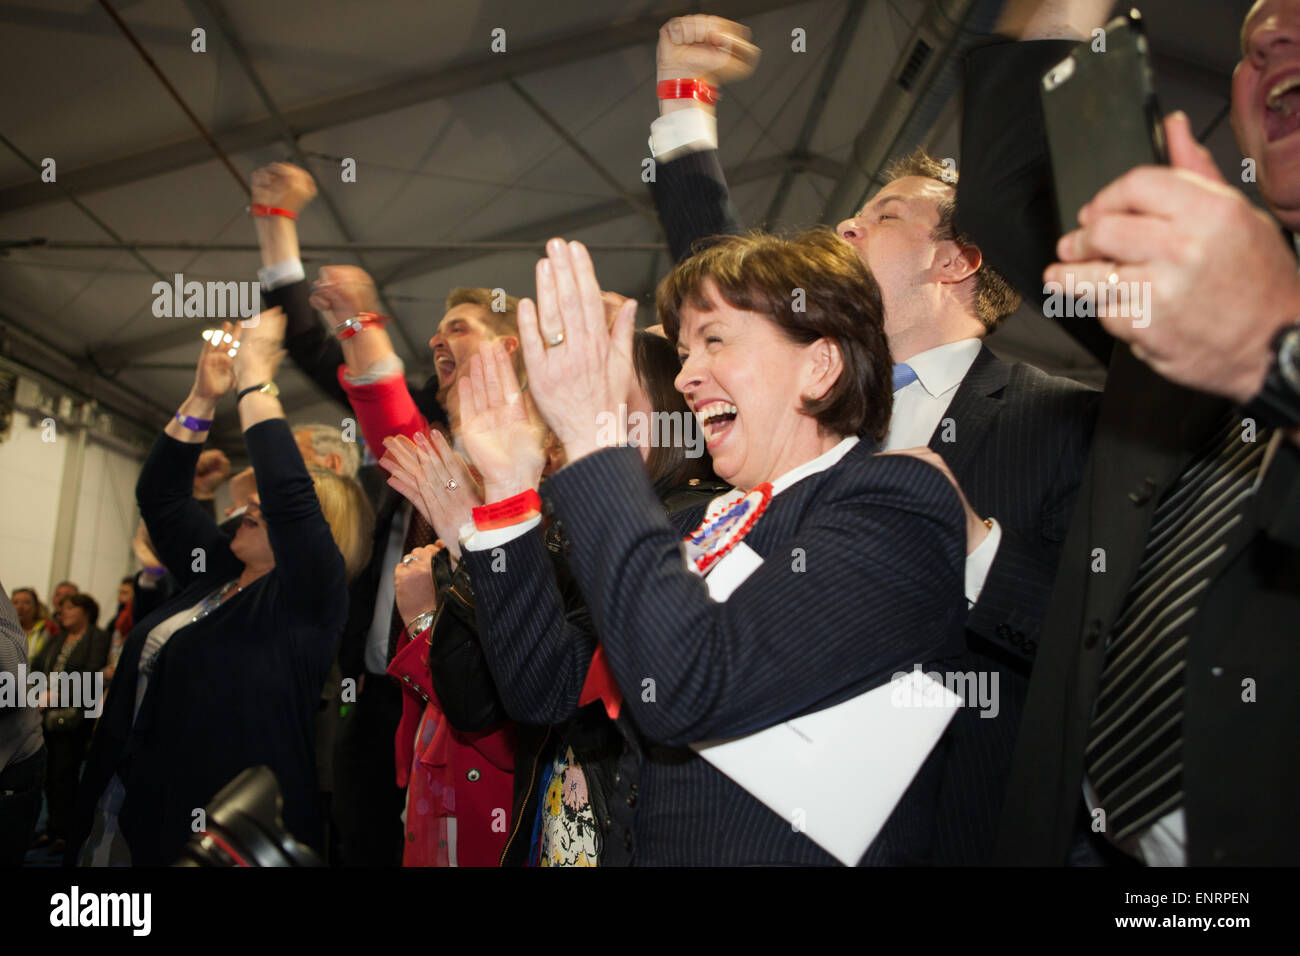 Belfast UK. 7th May 2015 General Election:  Diane Dodds  celebrating after husband Nigel wins the Seat for Belfast North Stock Photo